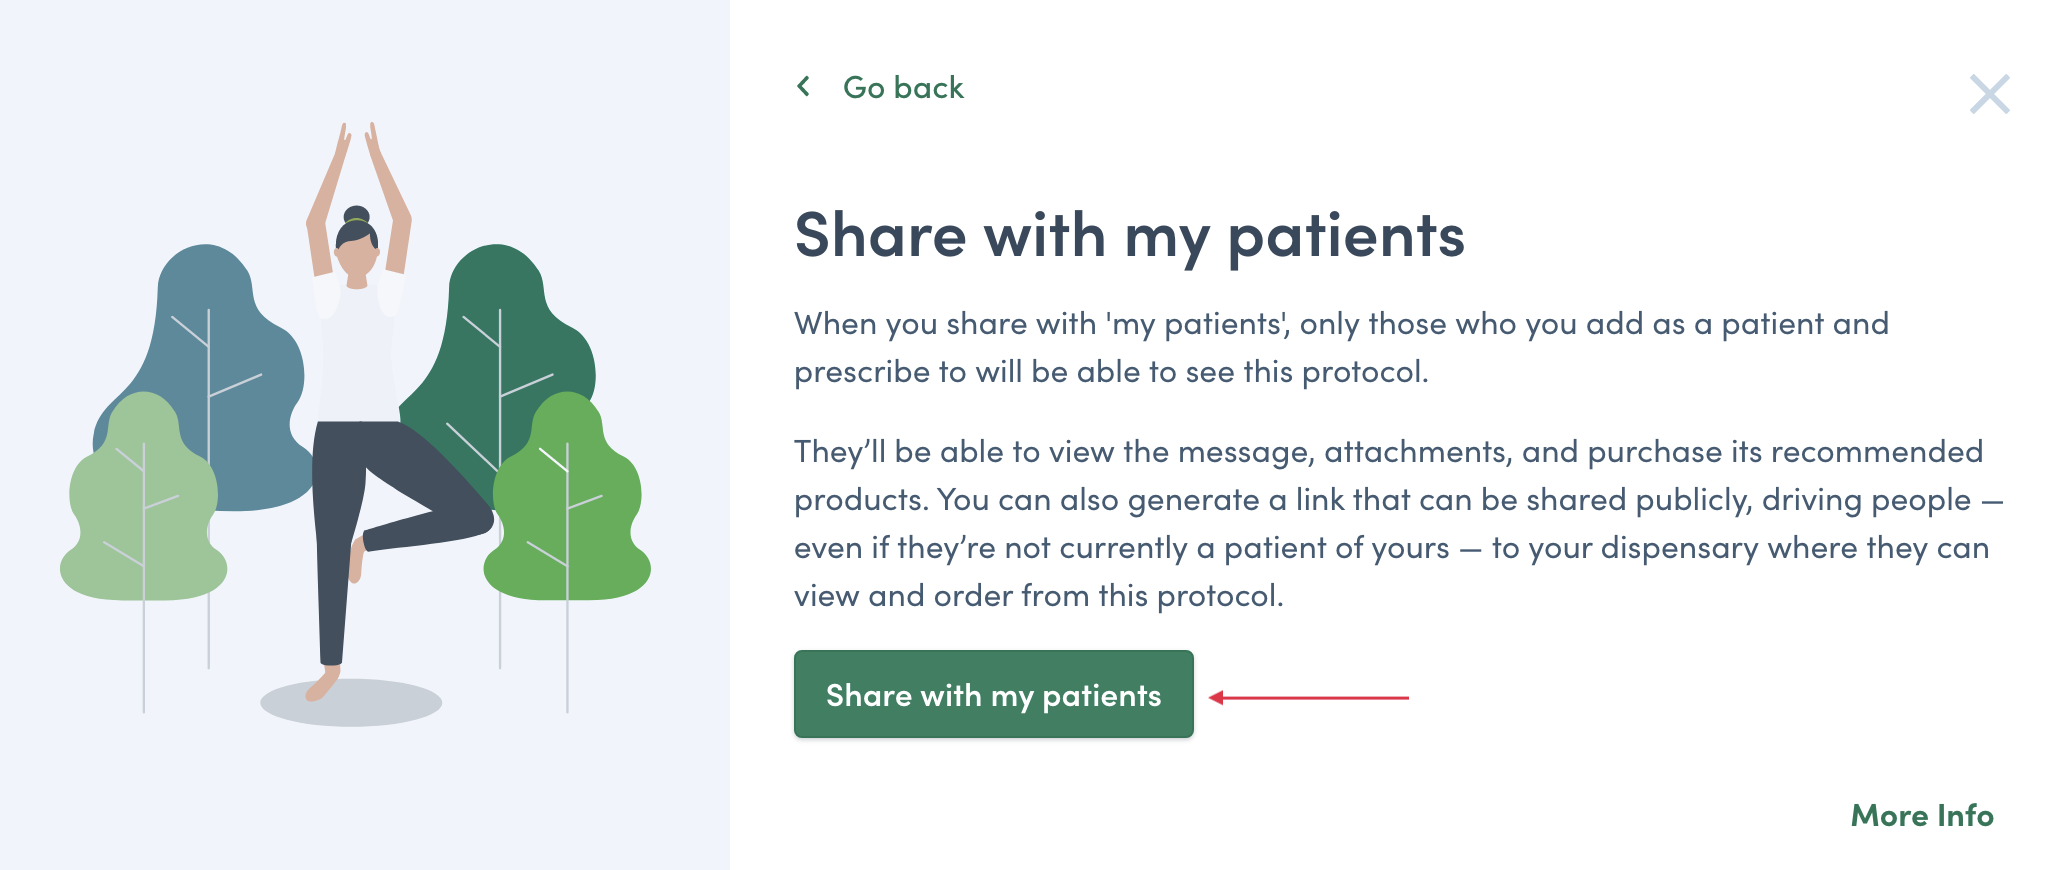 selecting share with all patients